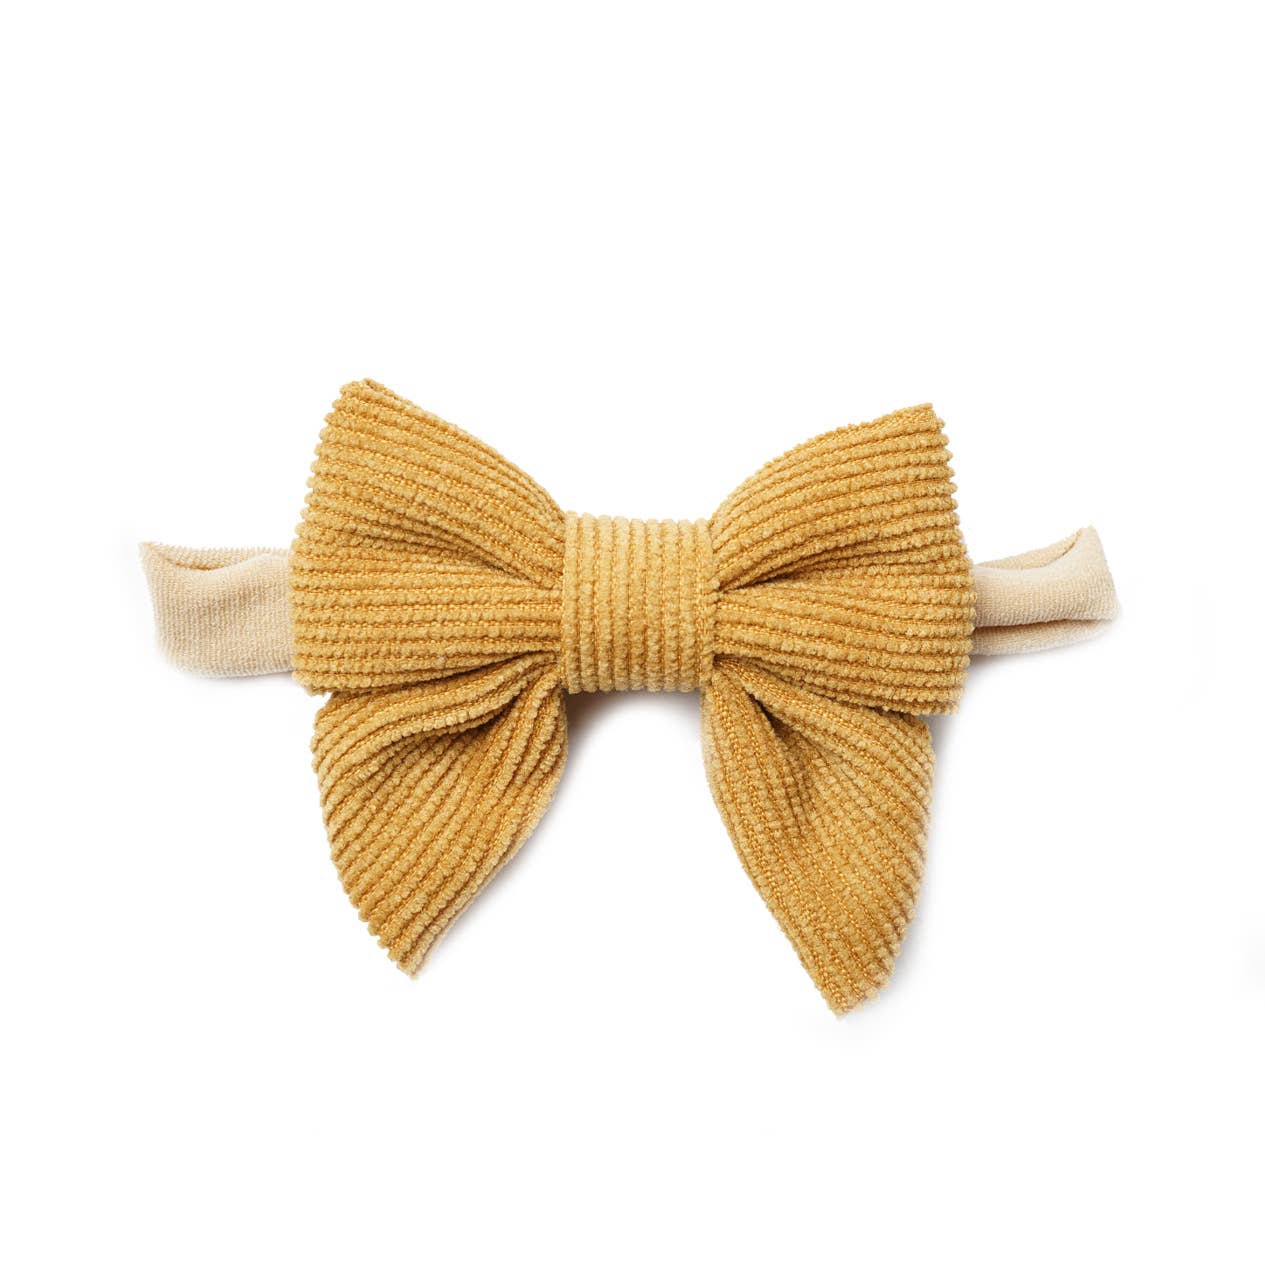 Emerson and Friends bow headband